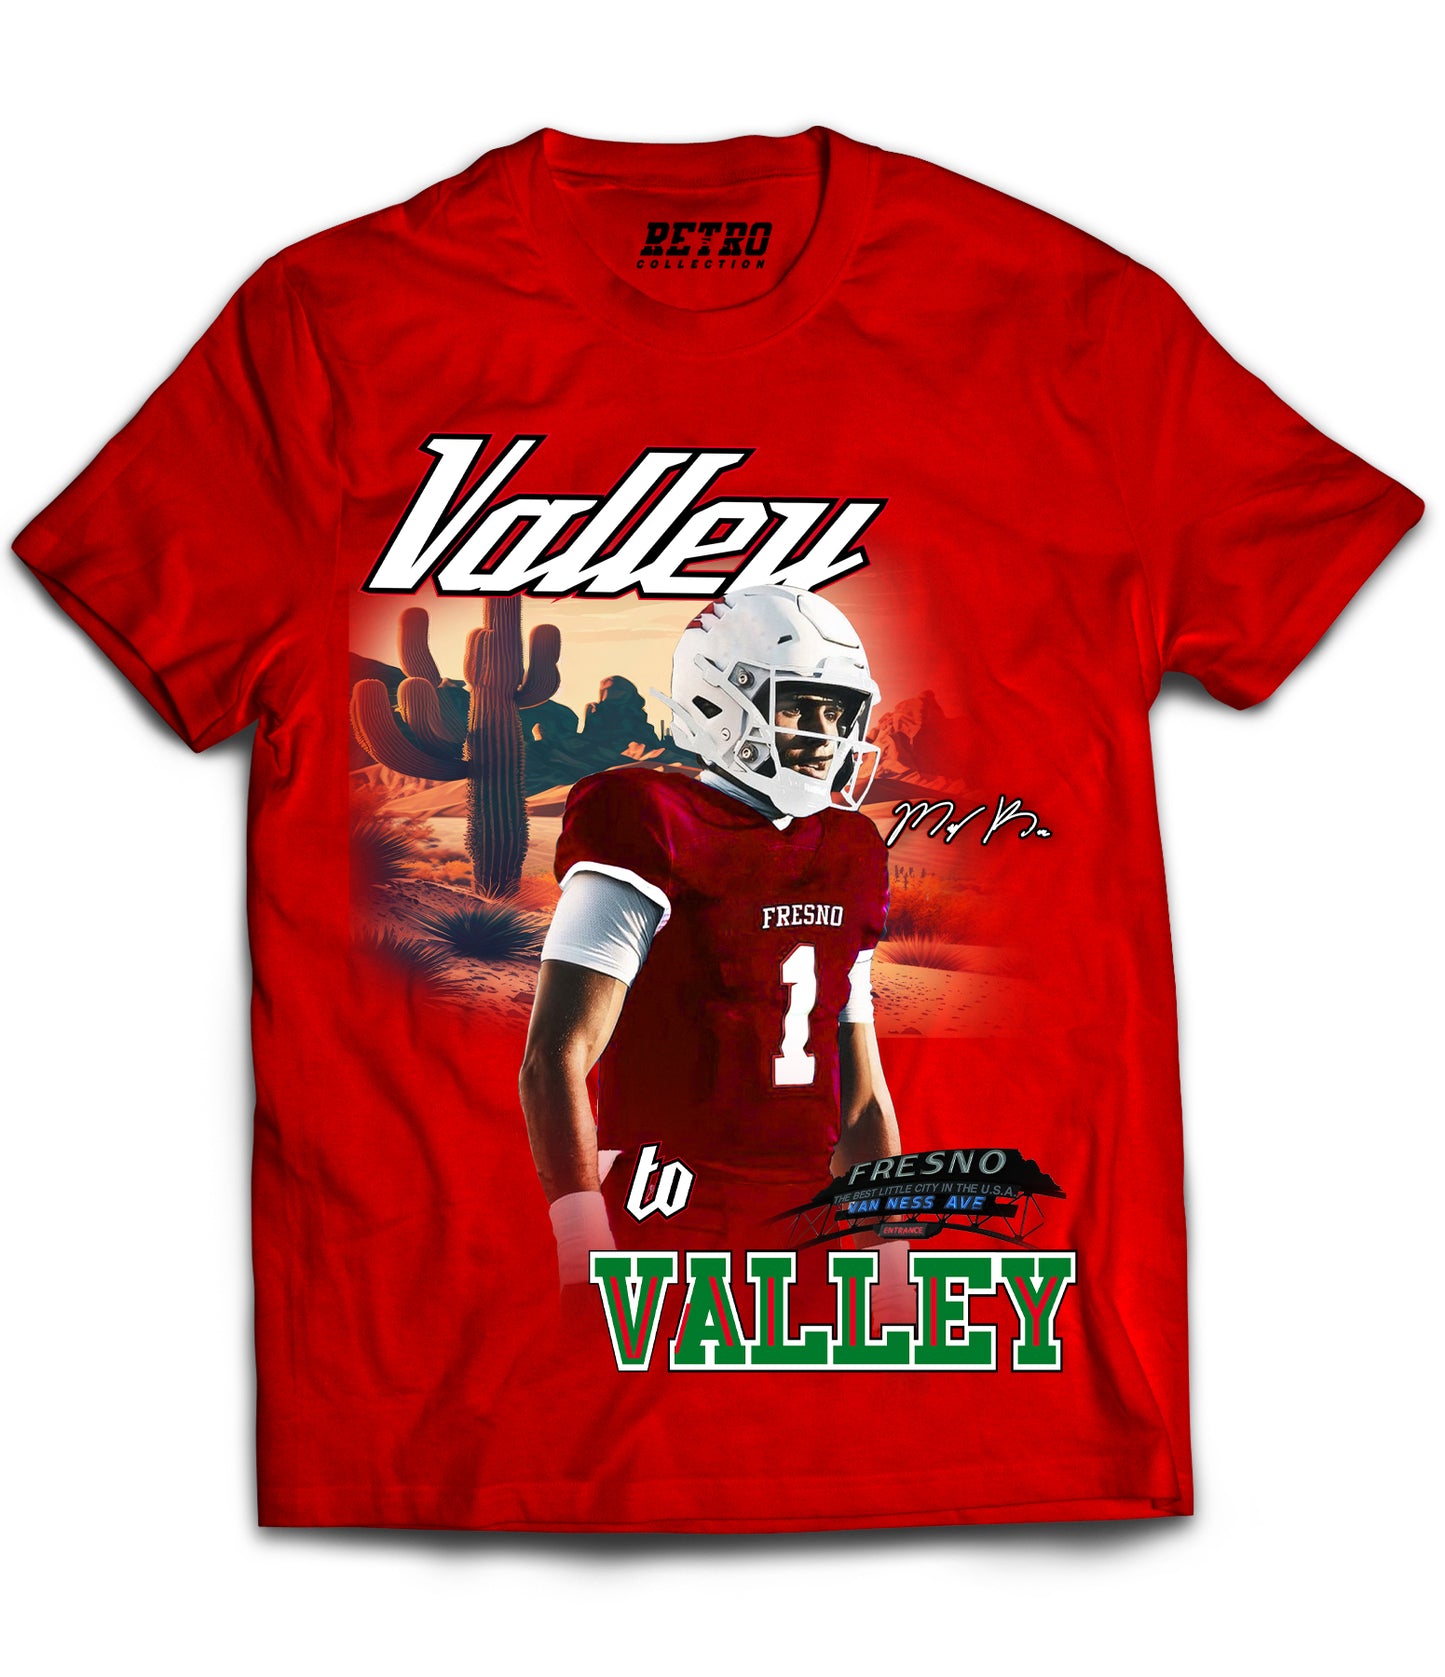 Mikey Keene “Valley to Valley” Tribute Shirt *LIMITED EDITION* (Black, Red, White)